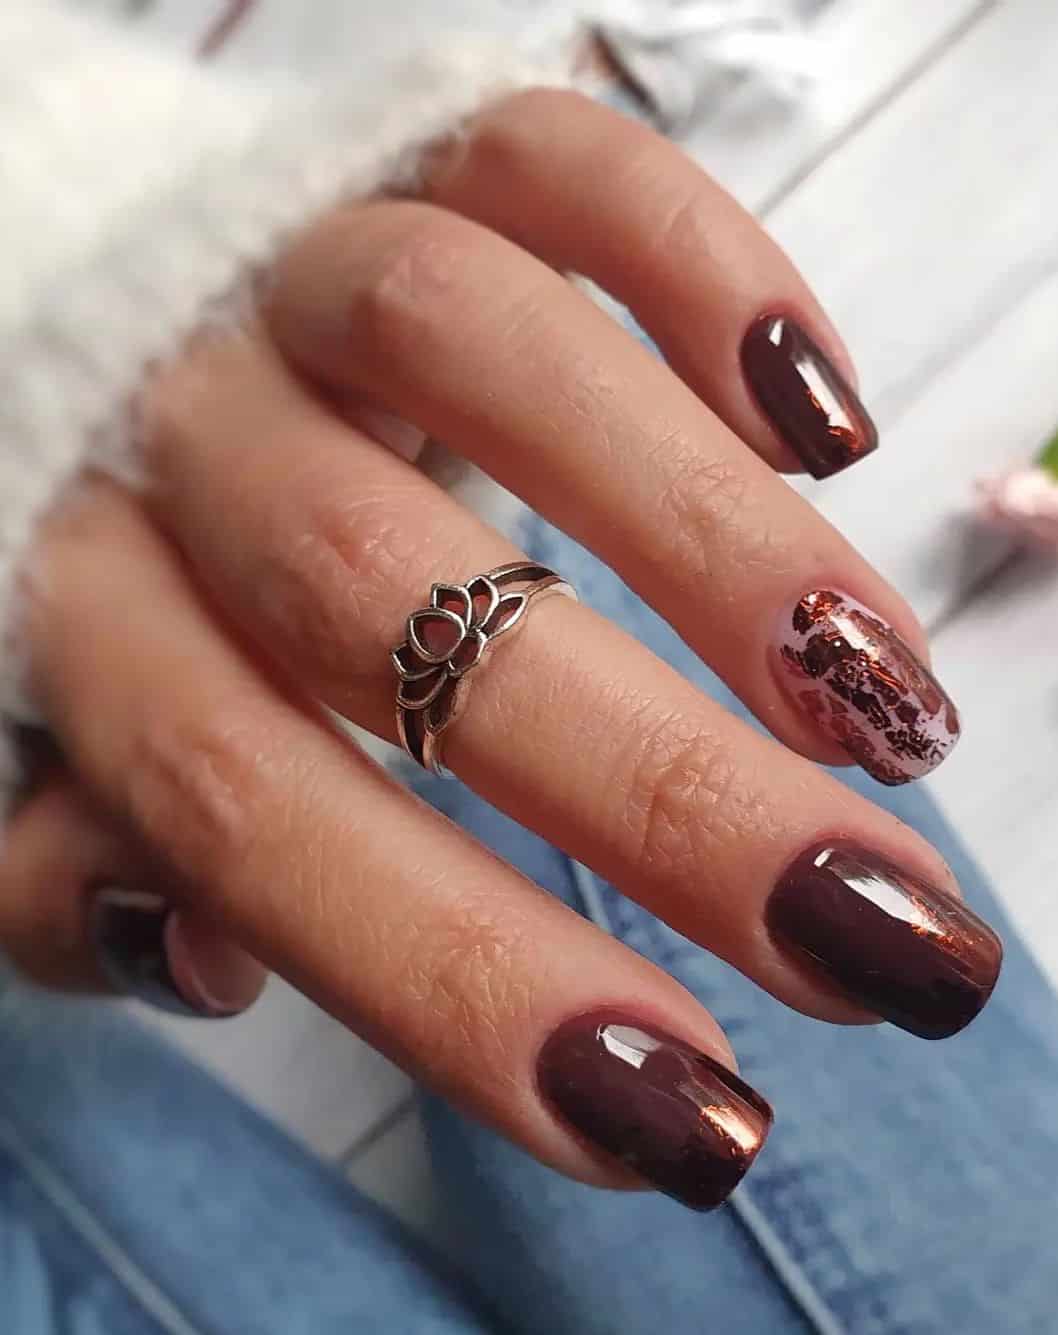 A hand with short squoval nails painted a glossy brown with a metallic brown flake accent nail